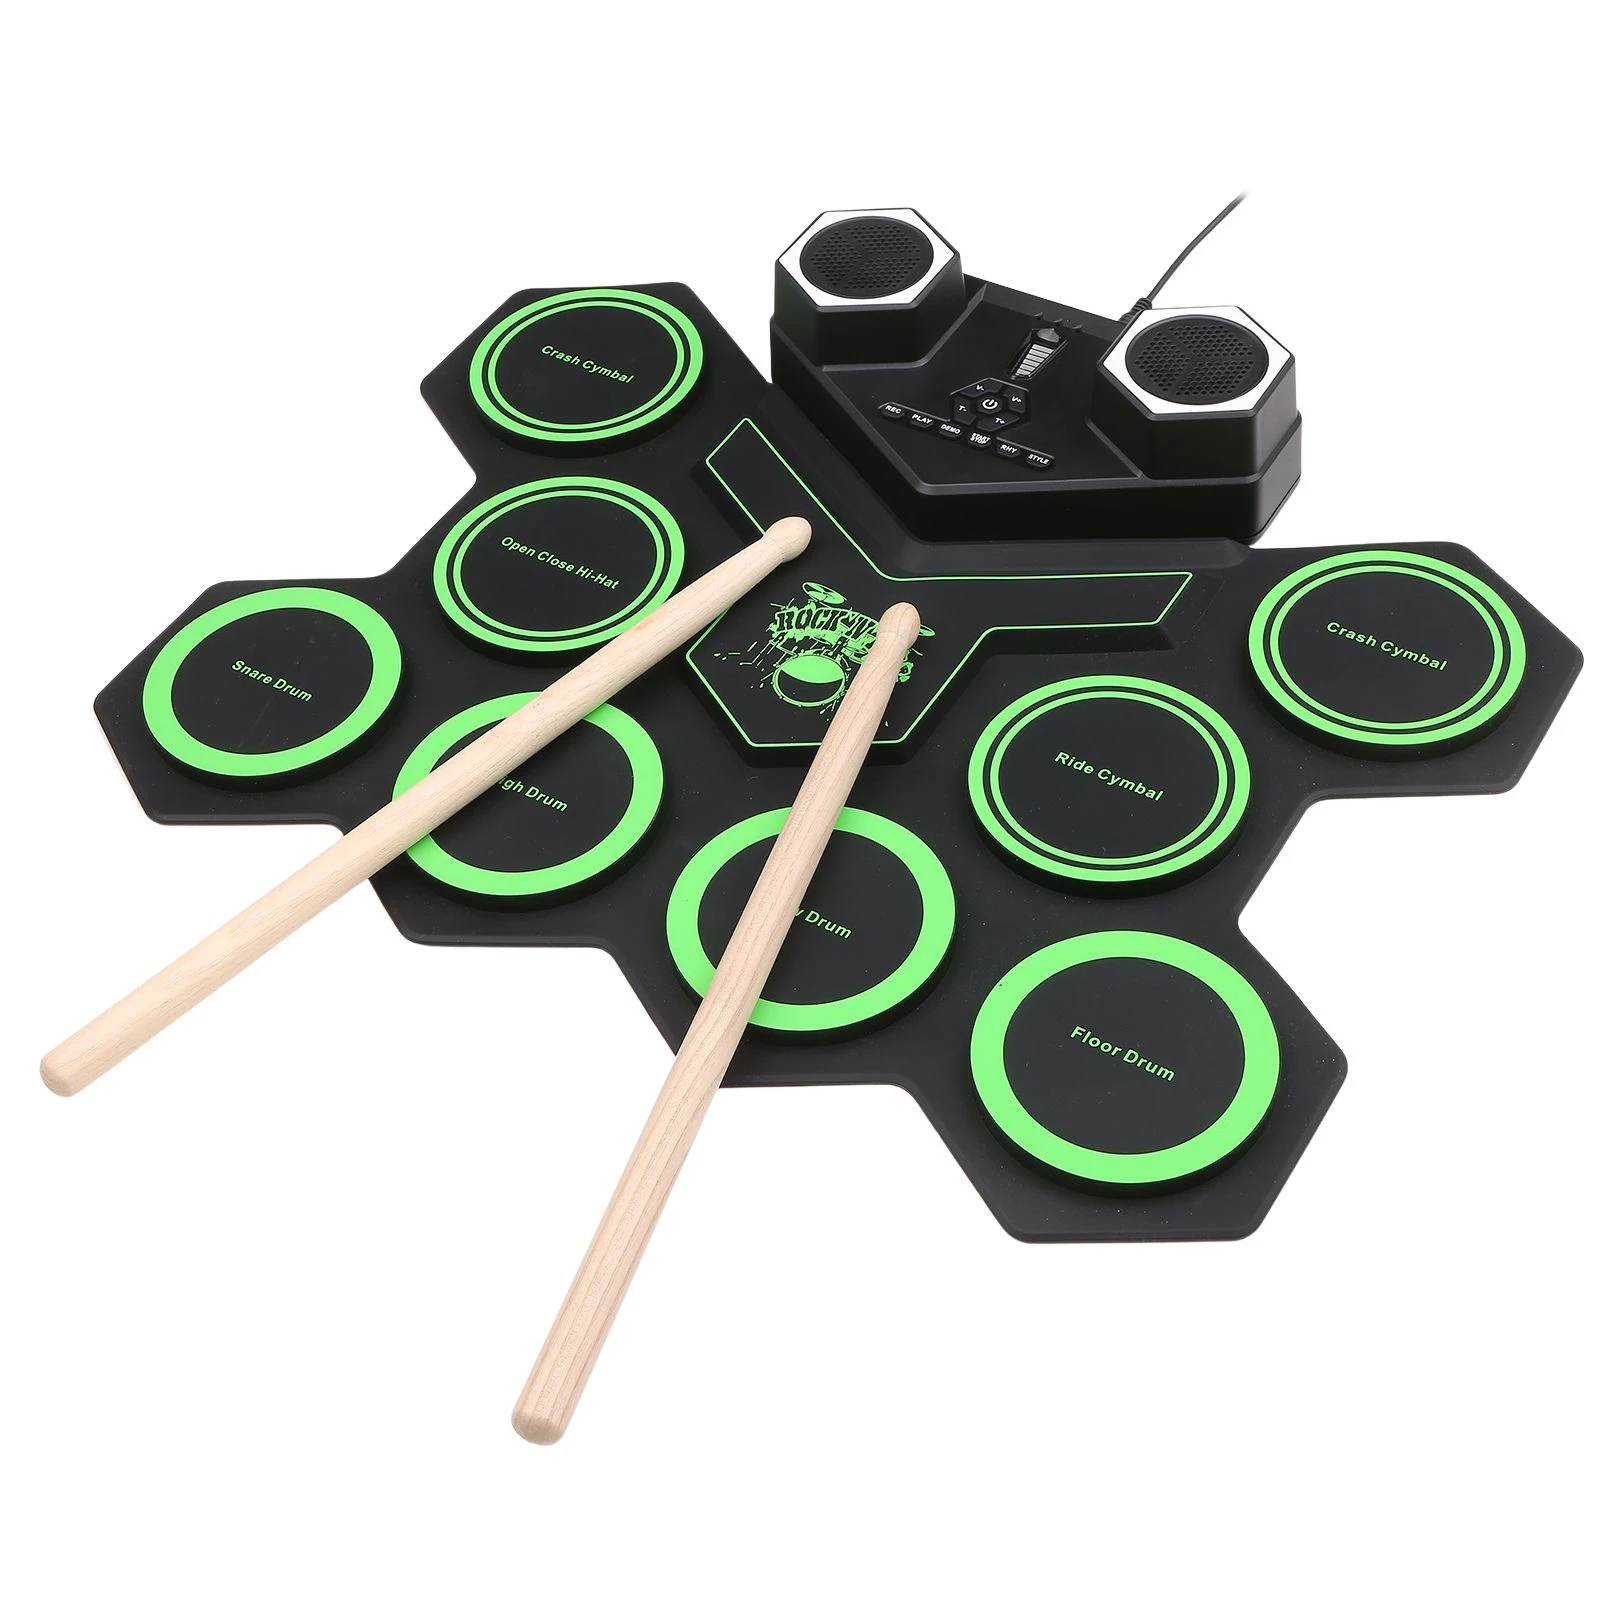 

USB Electronic Drum Portable Silicone Roll-up Drum Sets with Foot Pedal Drumsticks Built-in Battrey for Beginners Practicing